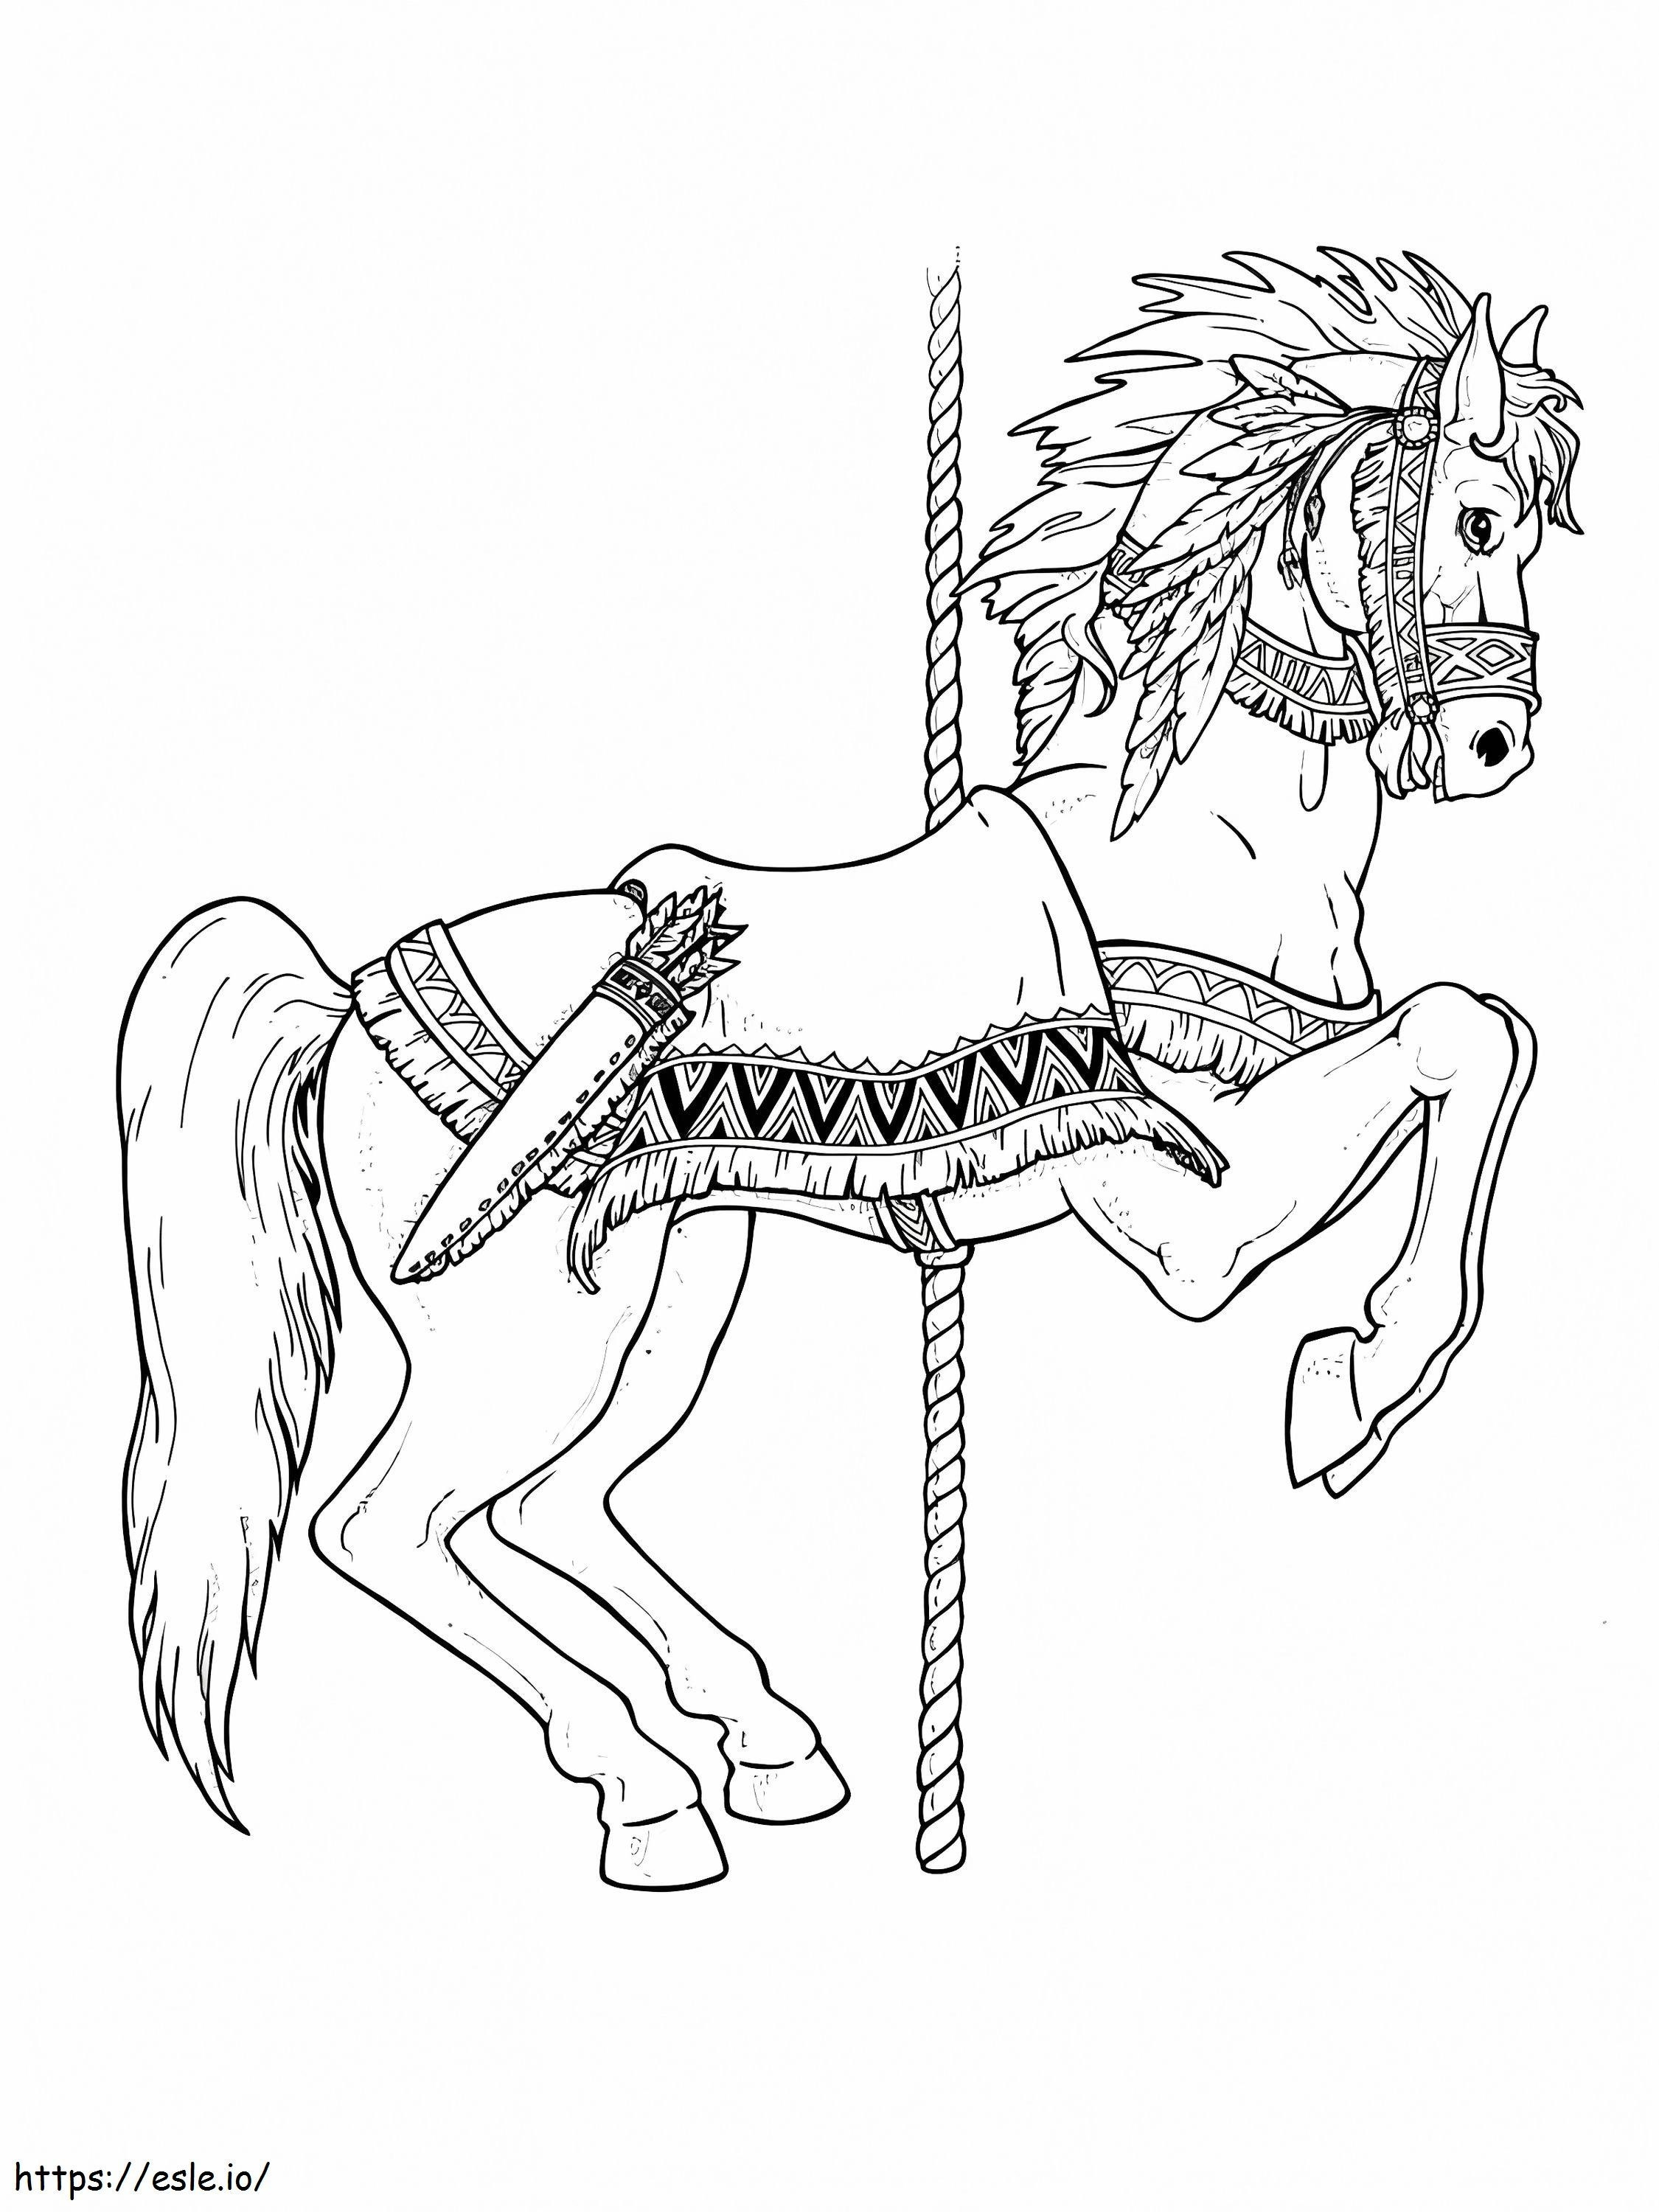 Carousel Horse For Kids coloring page